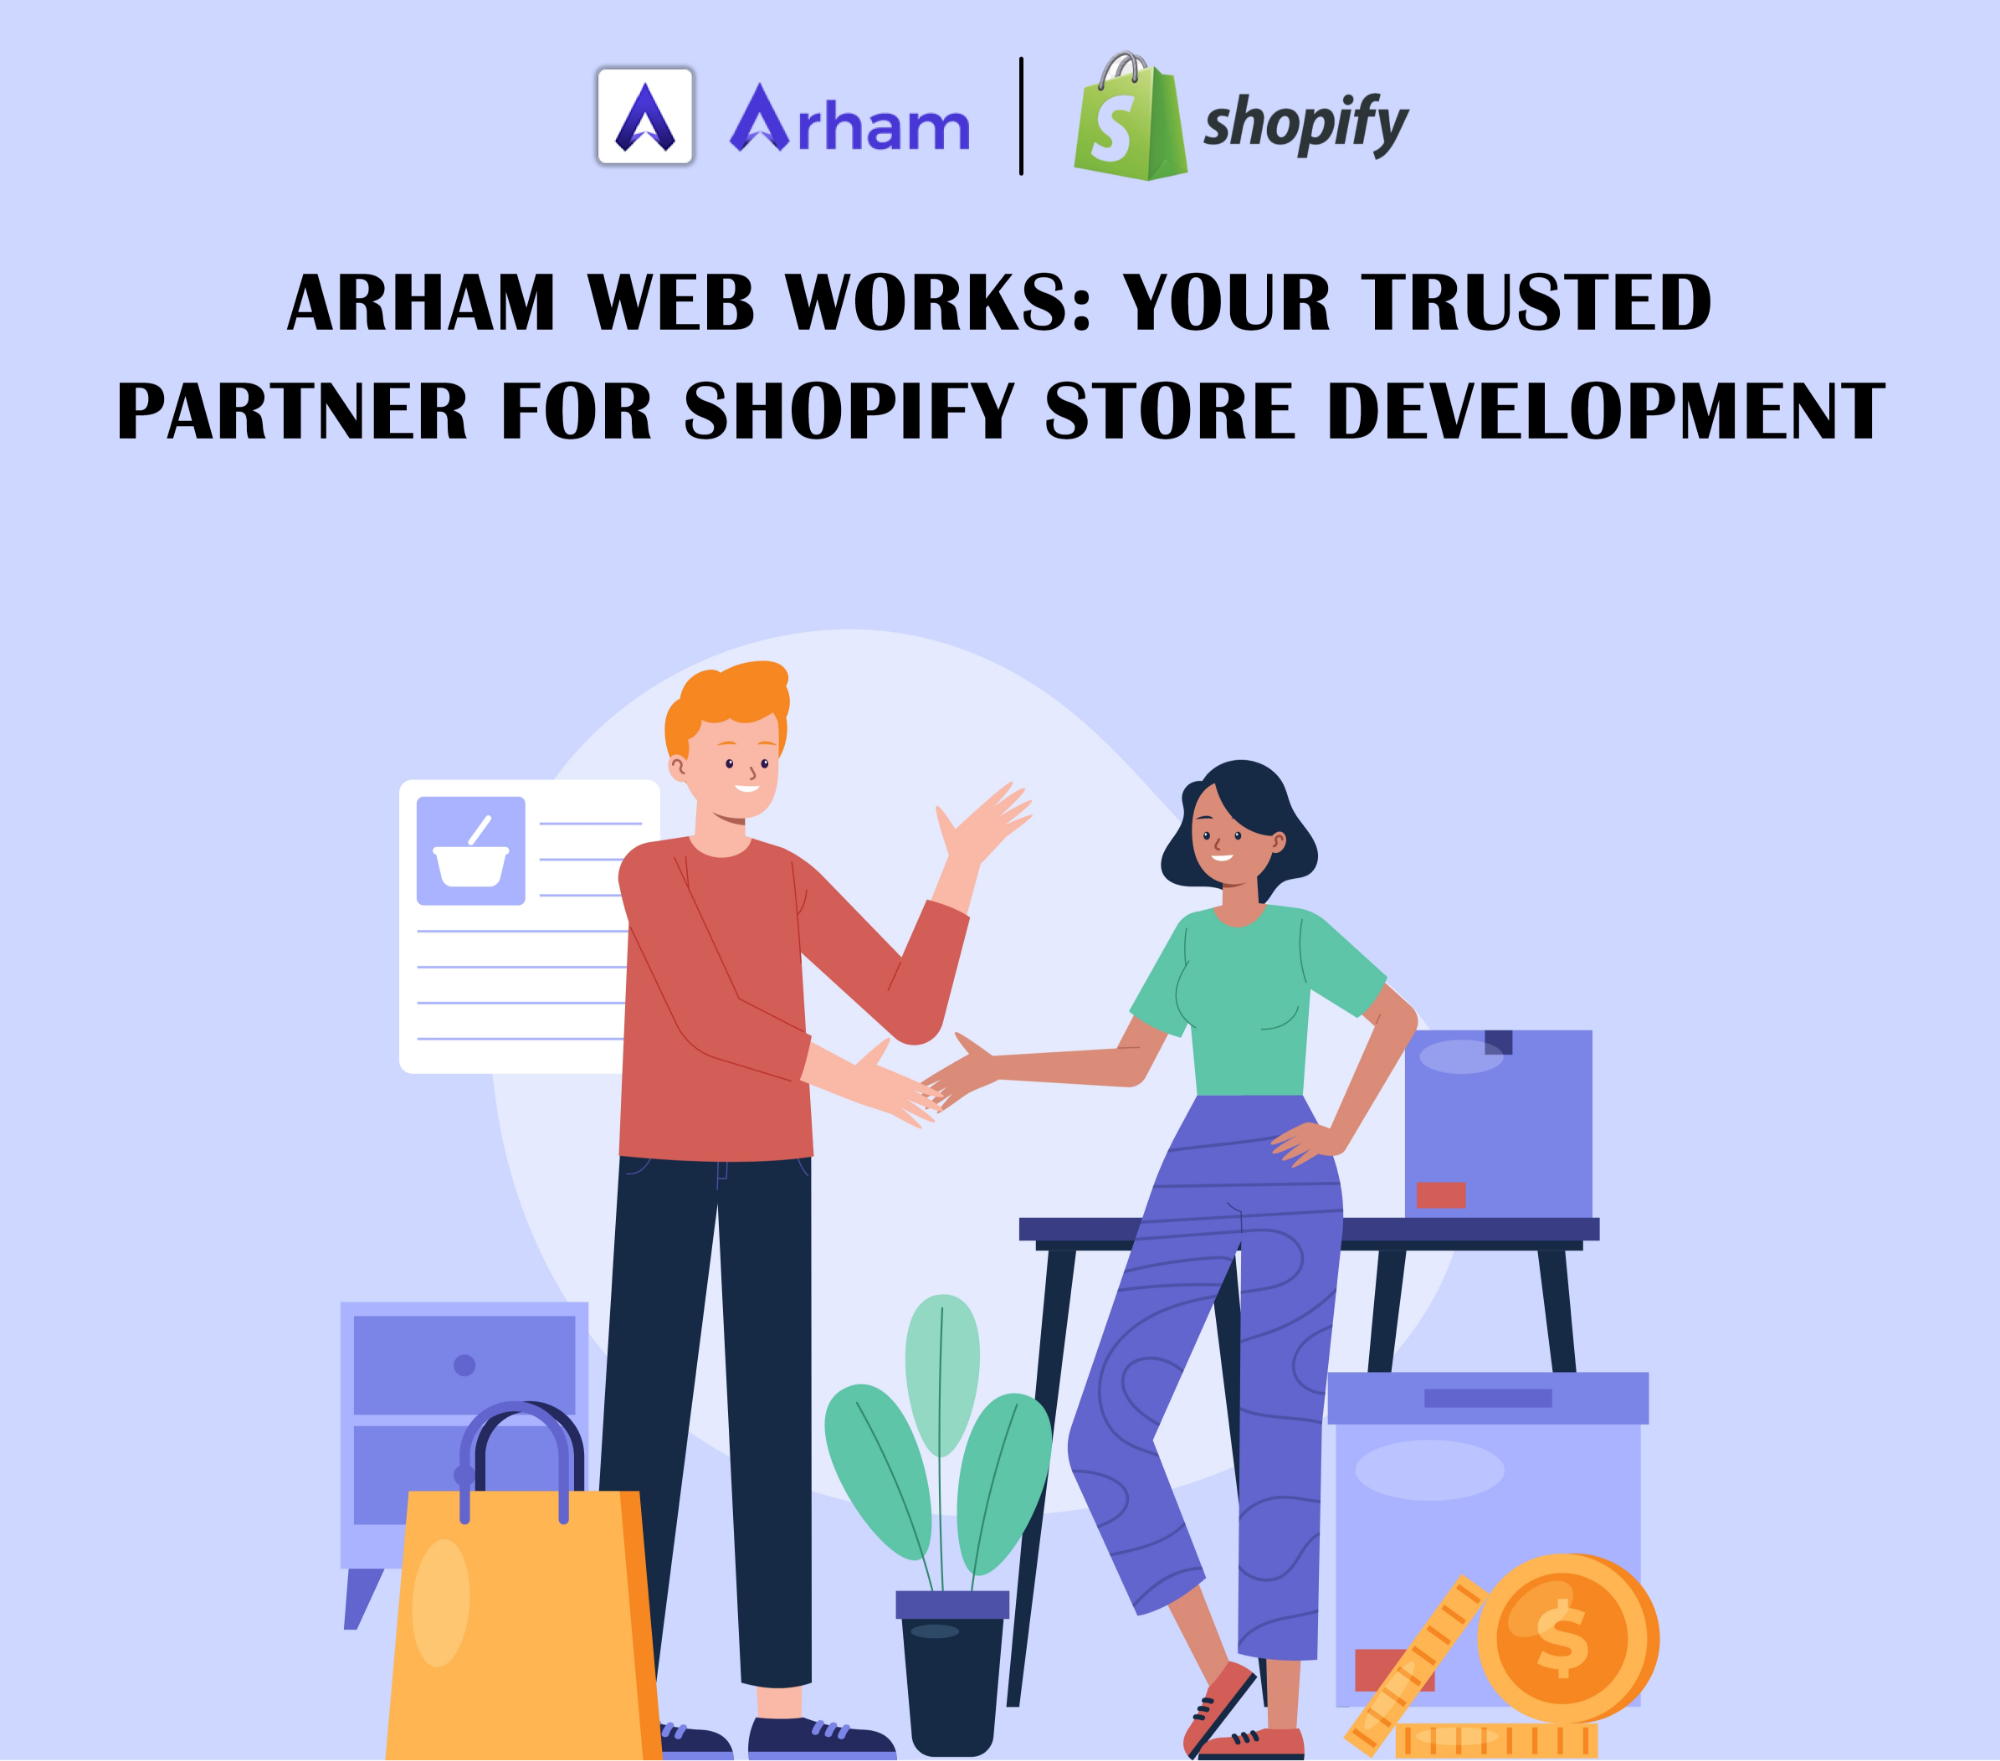 Arham Web Works: Your Trusted Partner for Shopify Store Development 